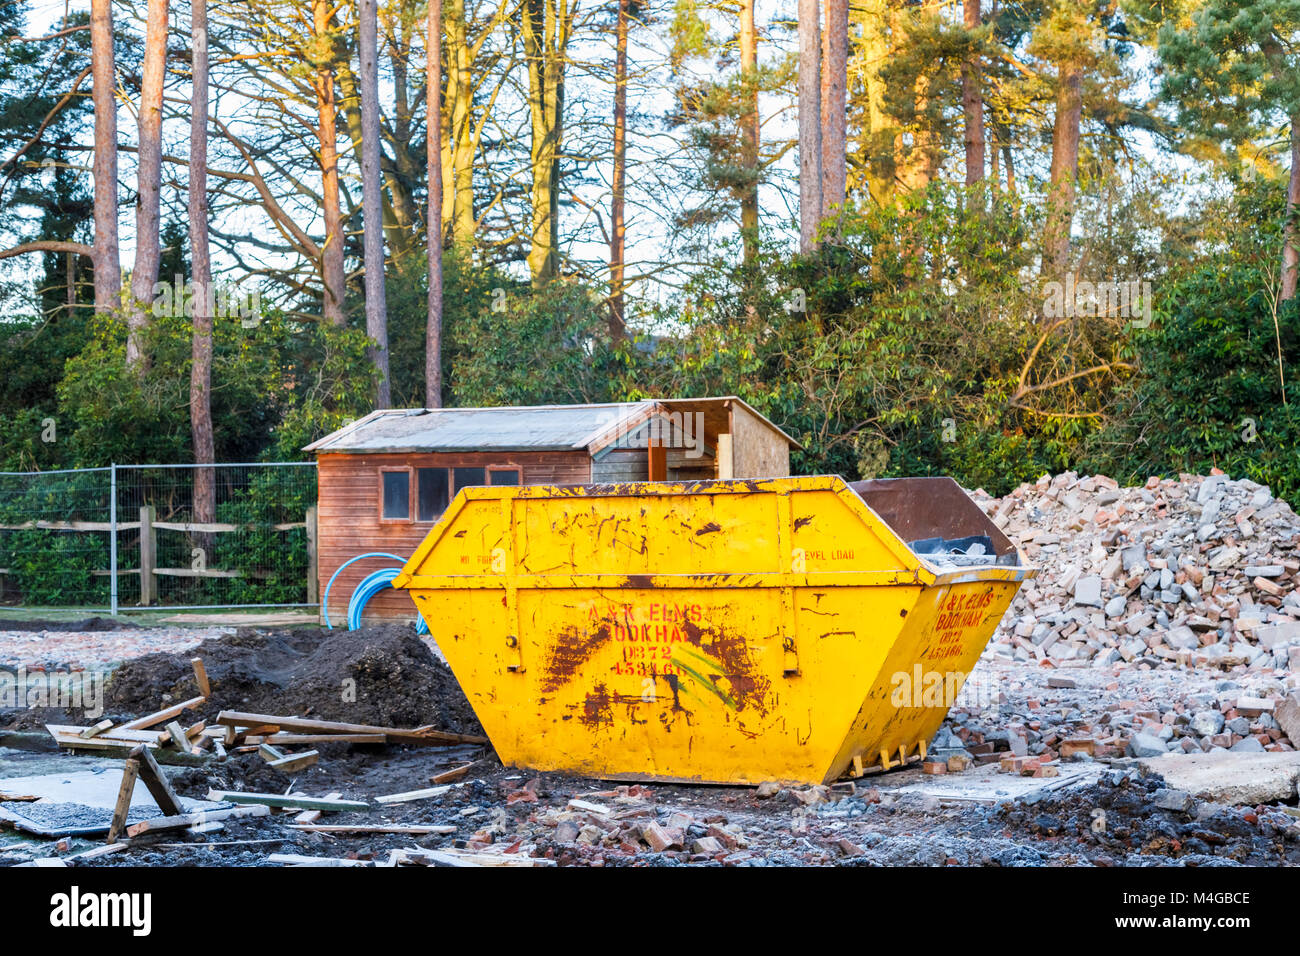 Real estate construction site: yellow skip in the remains of the demolition of a residential house property on a building site prior to redevelopment Stock Photo